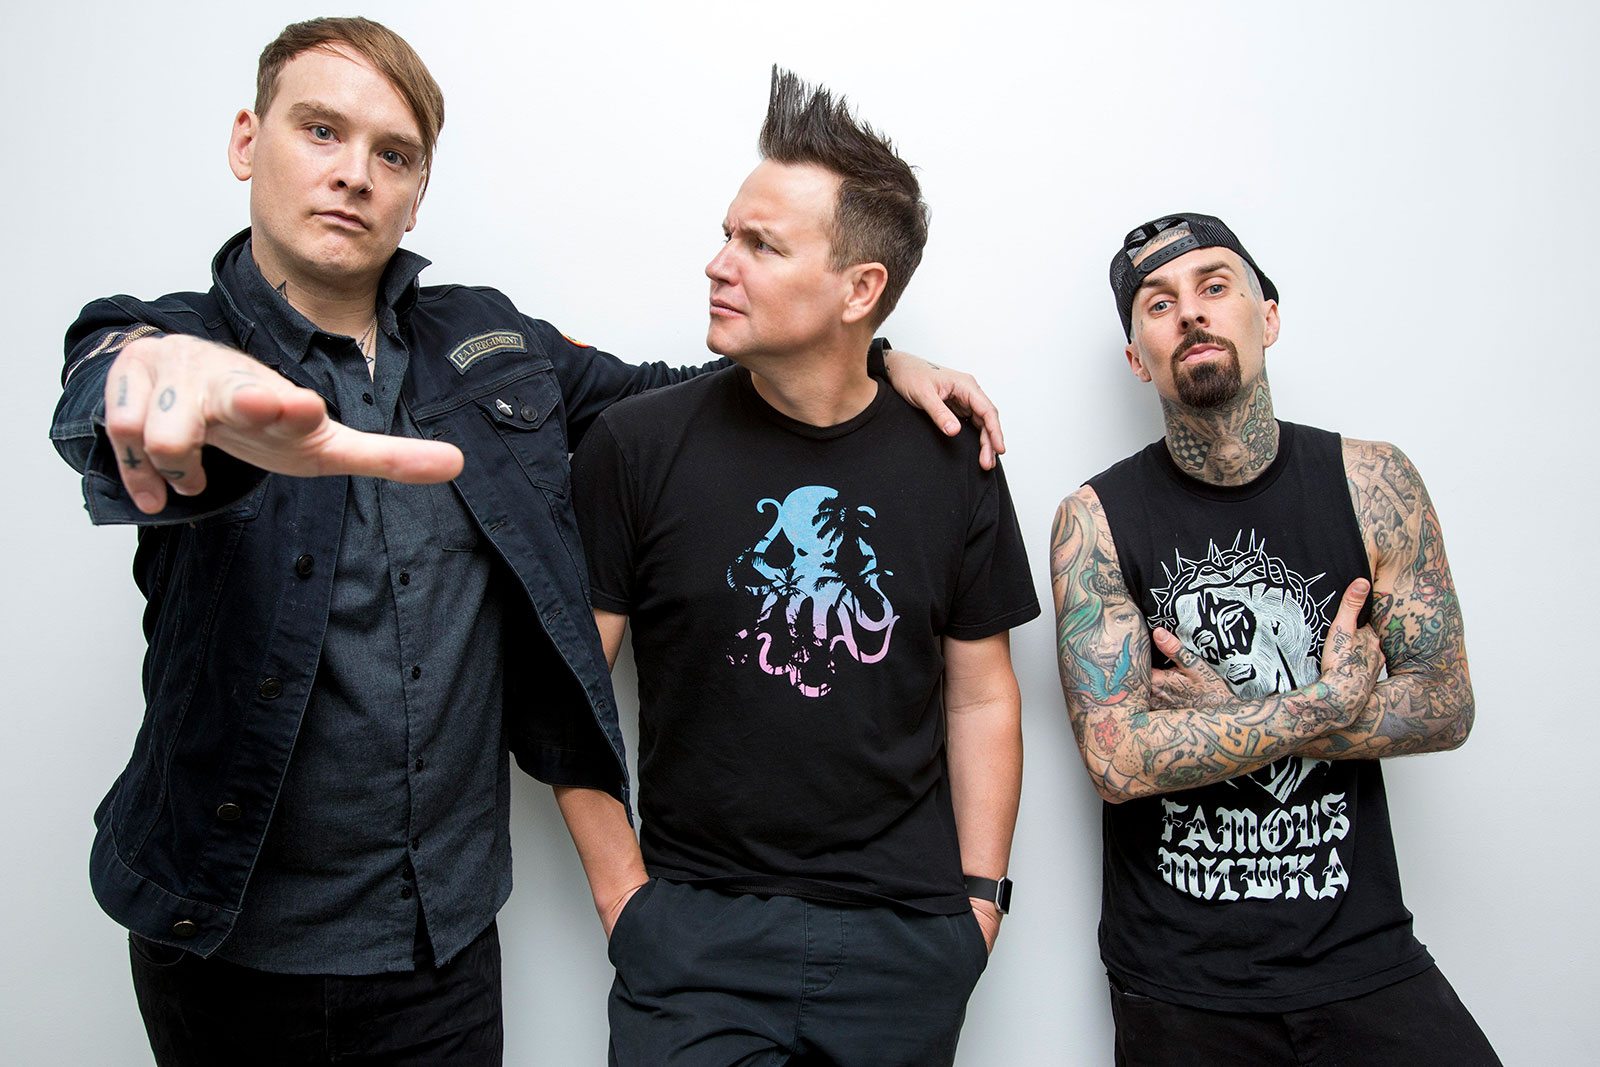 Mark Hoppus: “When you put on a show, you have to make sure people are safe”